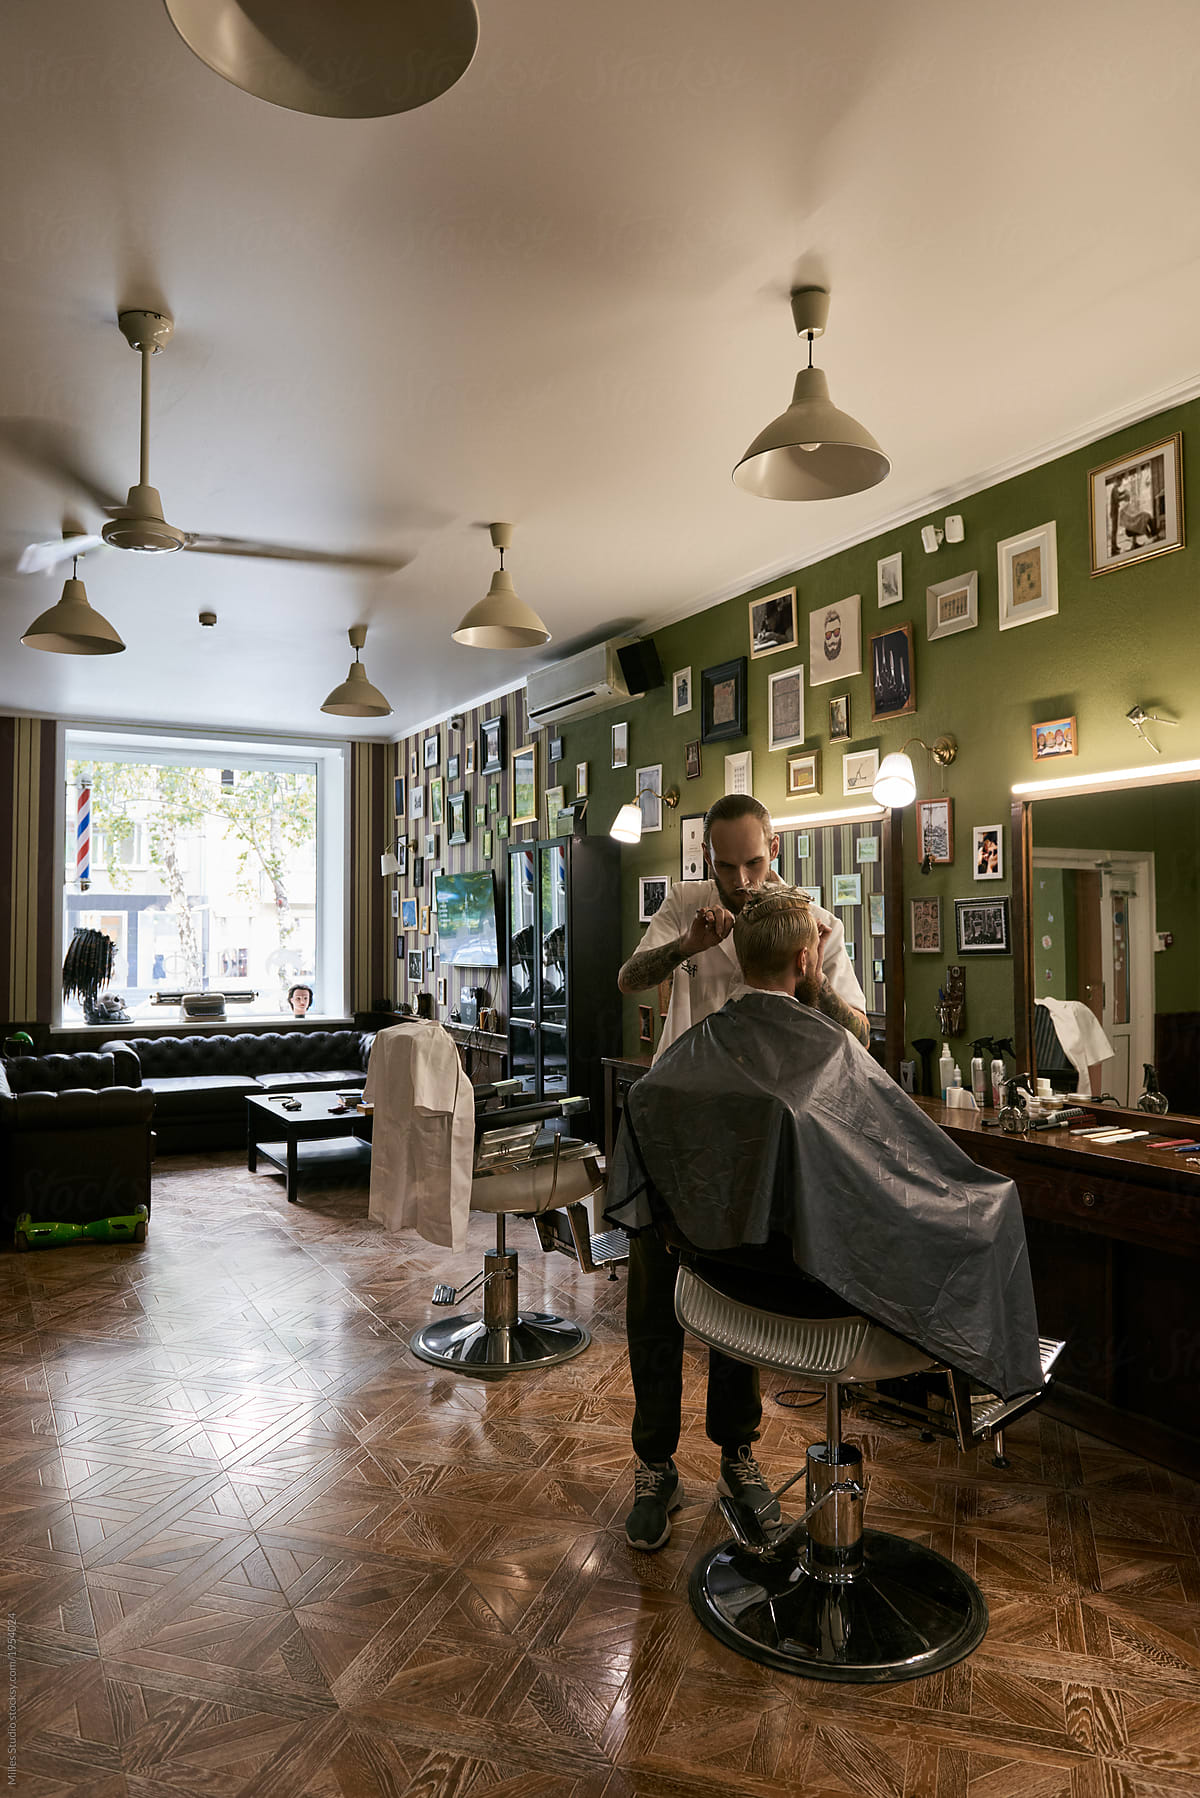 Barber working with client in salon